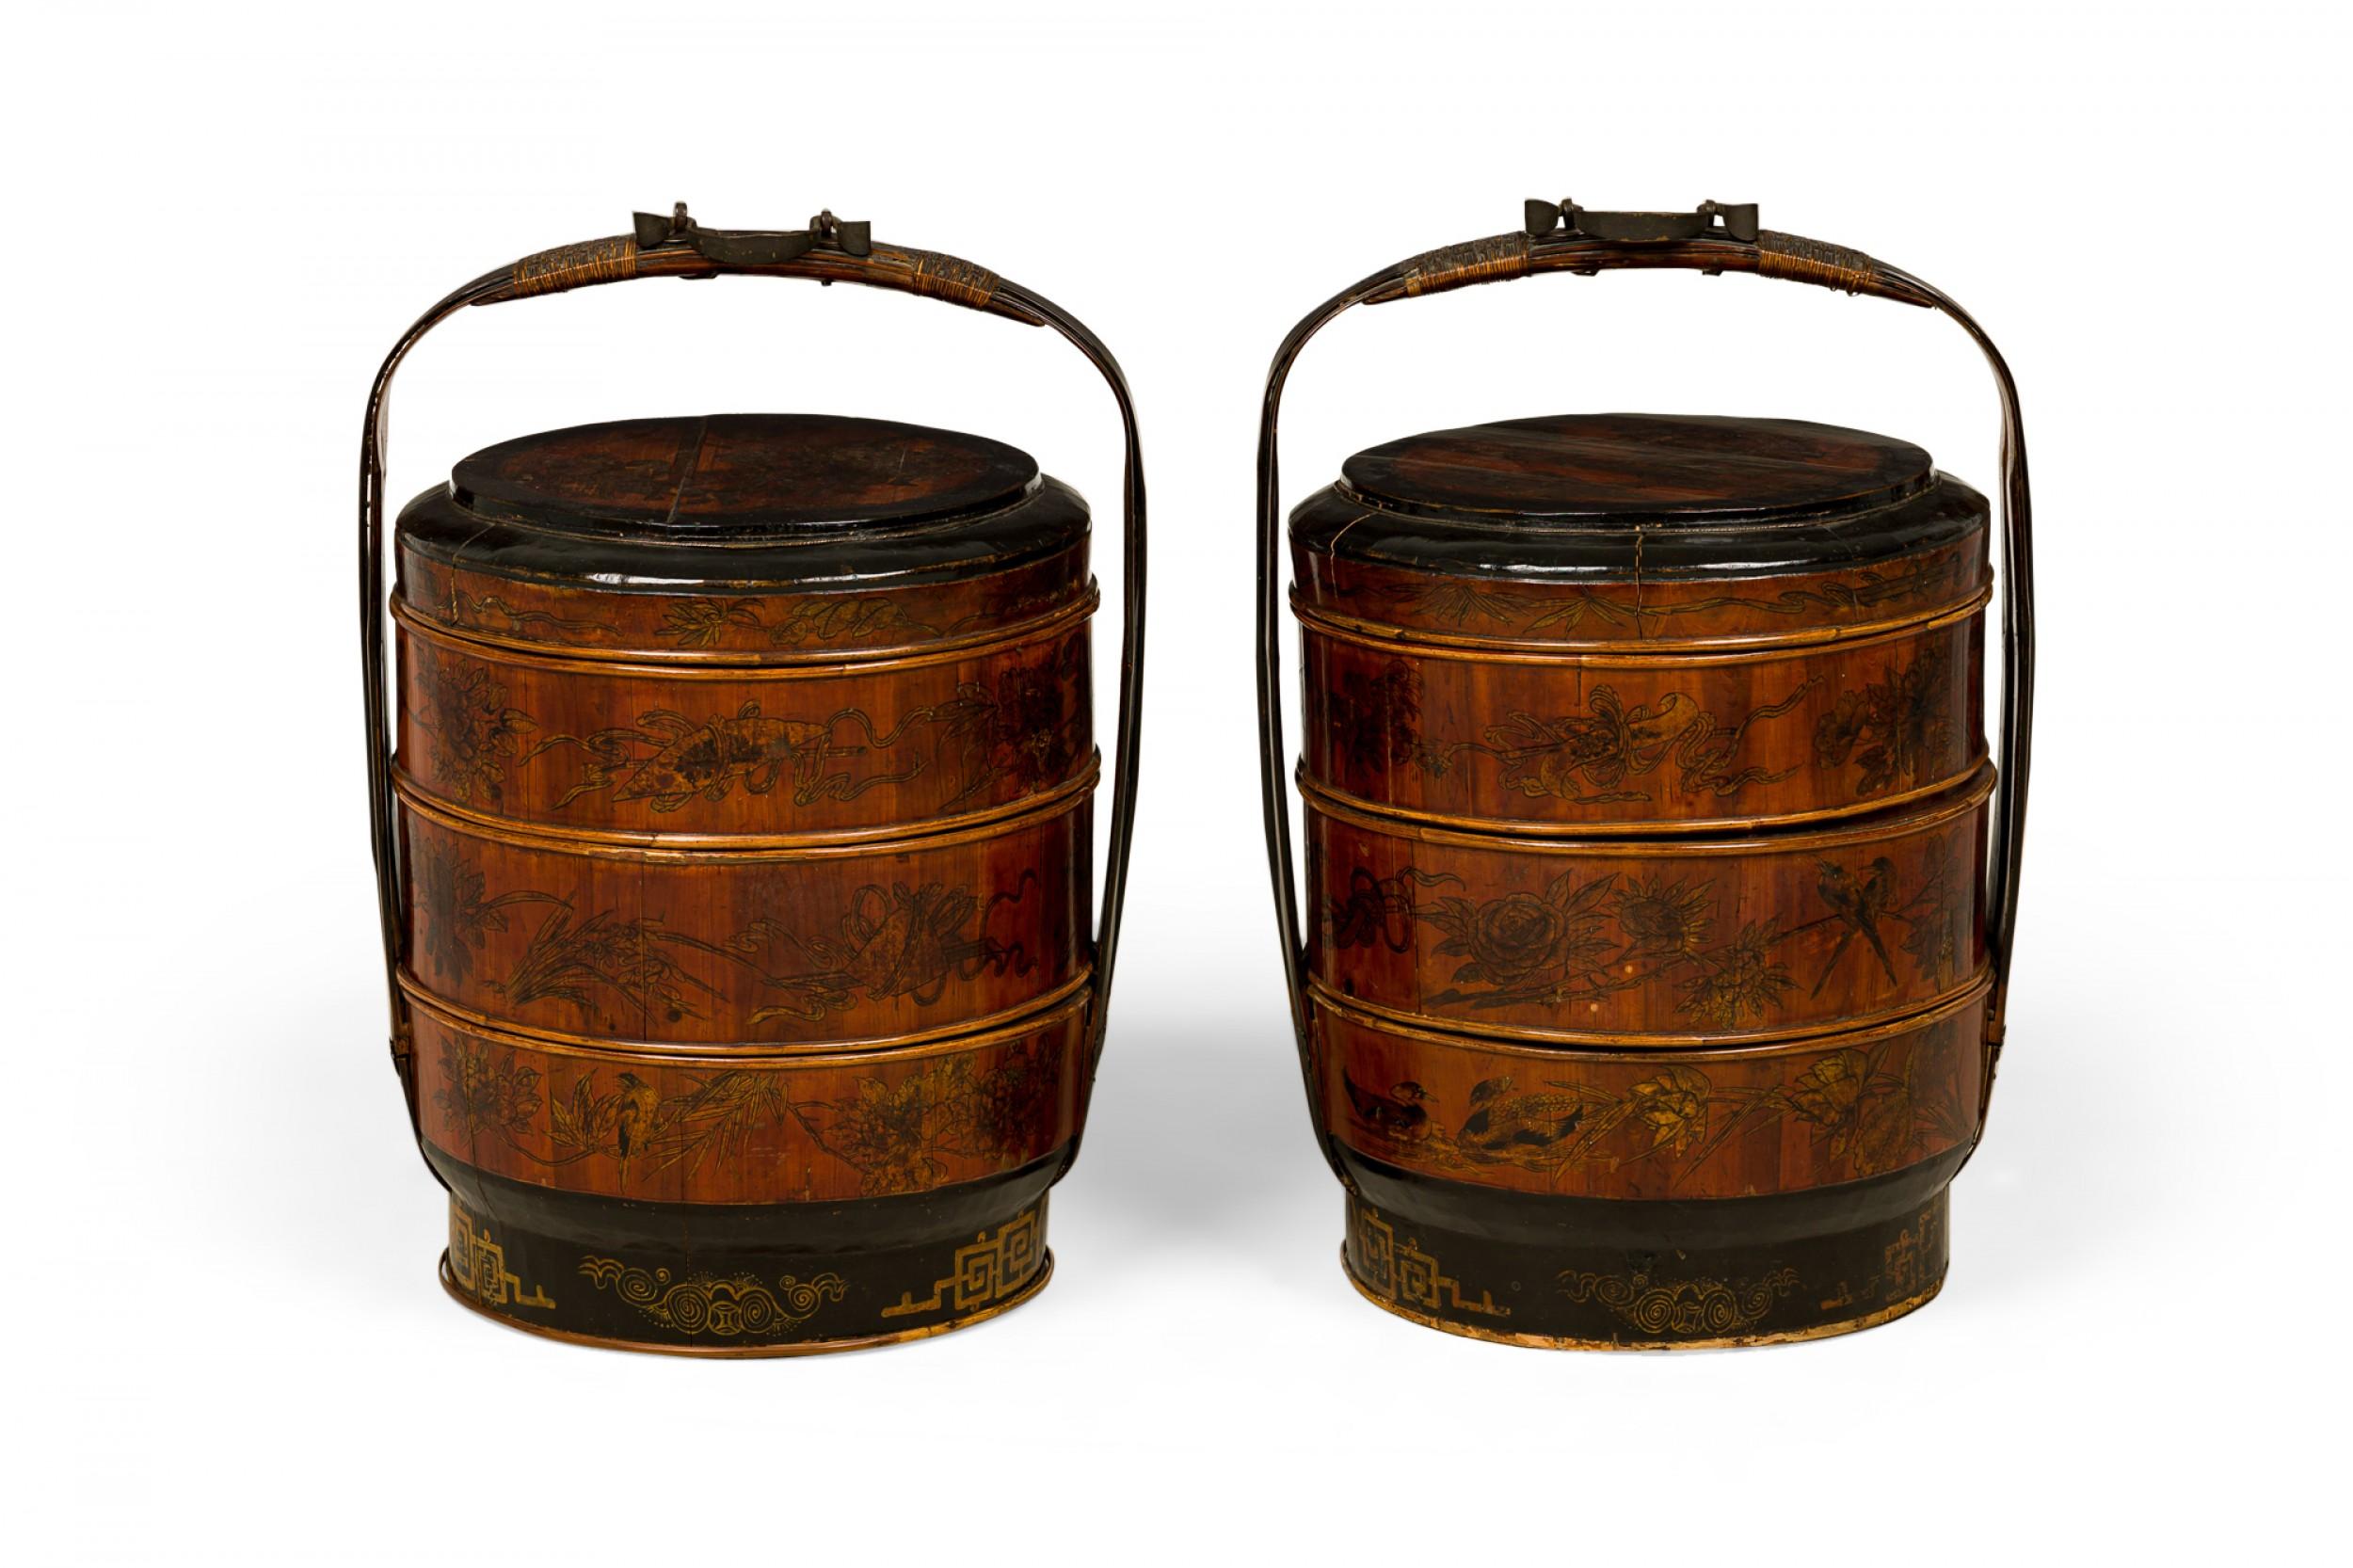 Pair of Antique Chinese wooden wedding baskets with lightly carved floral designs in horizontal bands along the exterior of three removable circular compartments, topped with a lid featuring a carved genre scene and mounted with carved wooden